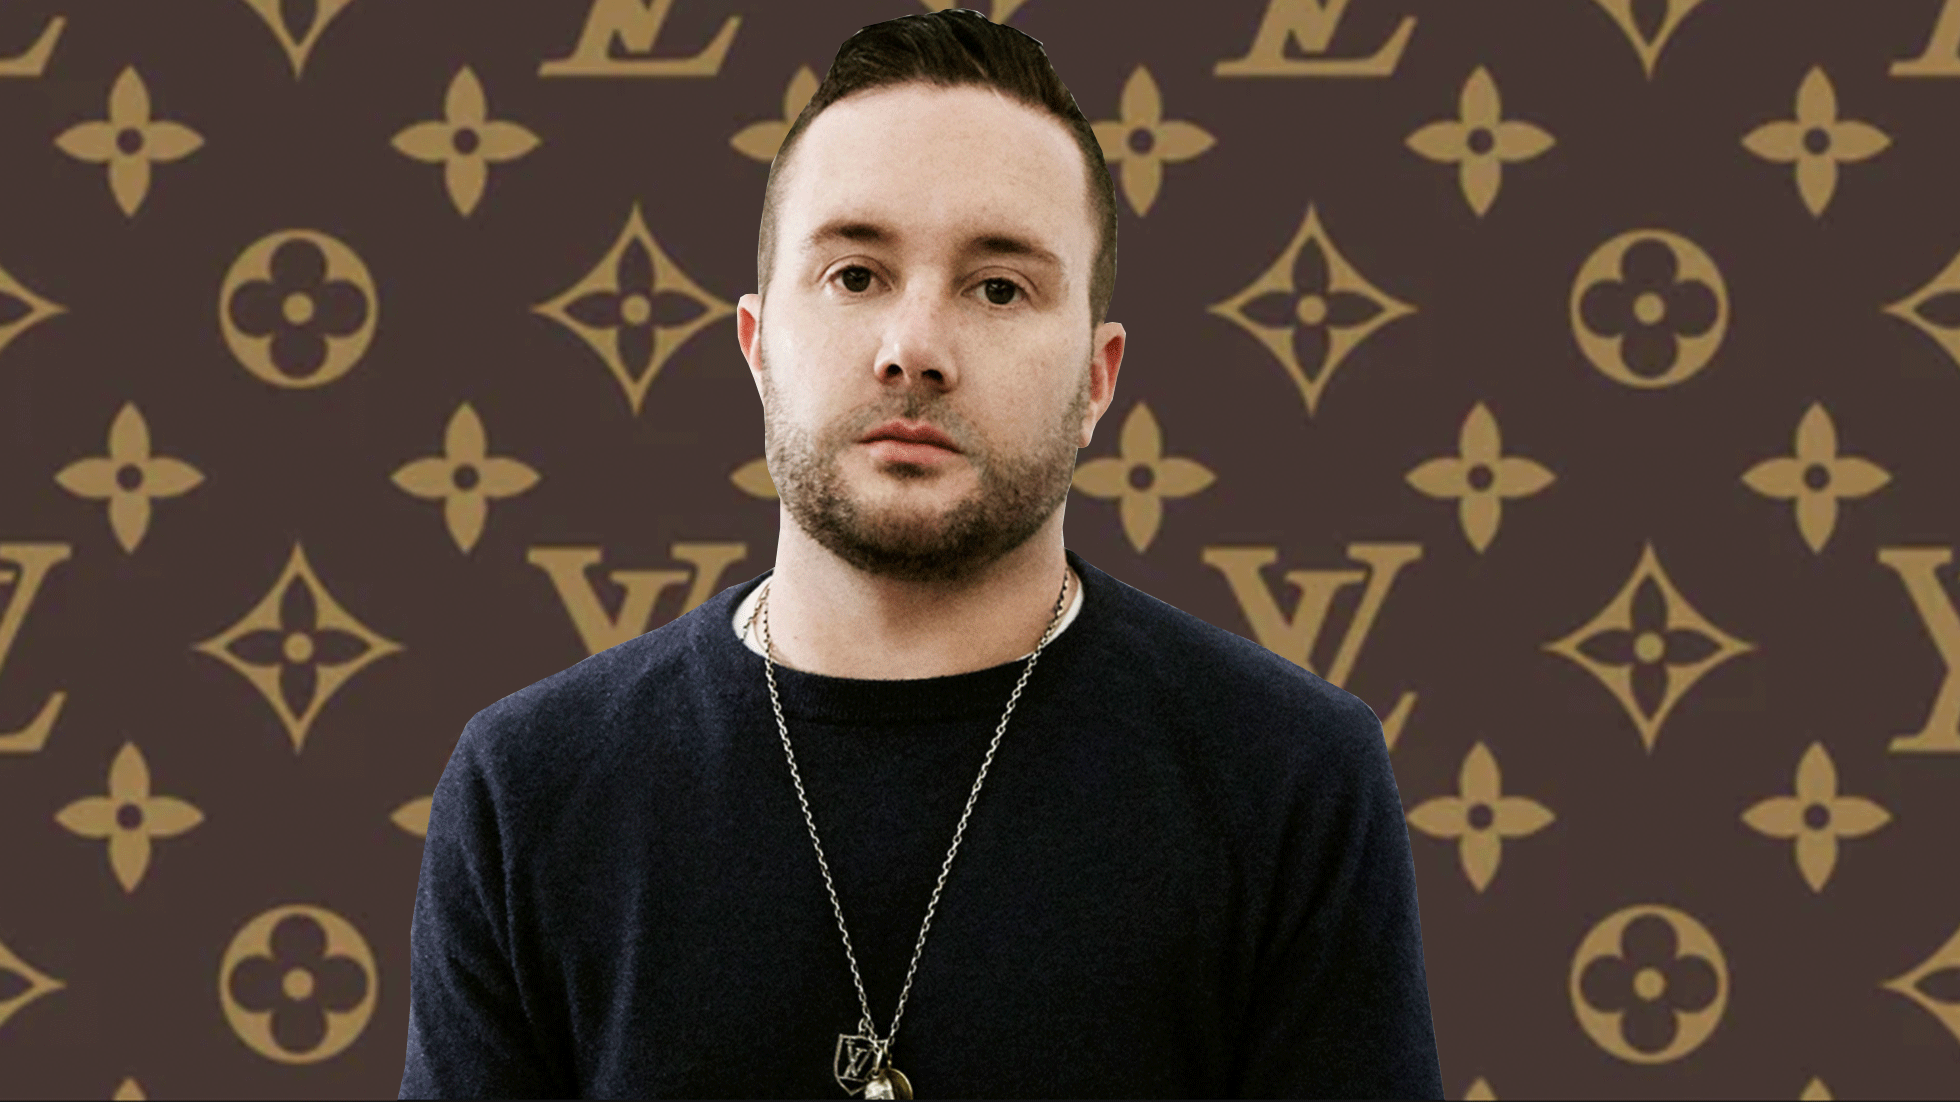 Kim Jones leaves Louis Vuitton. Here's a look back at his top 10